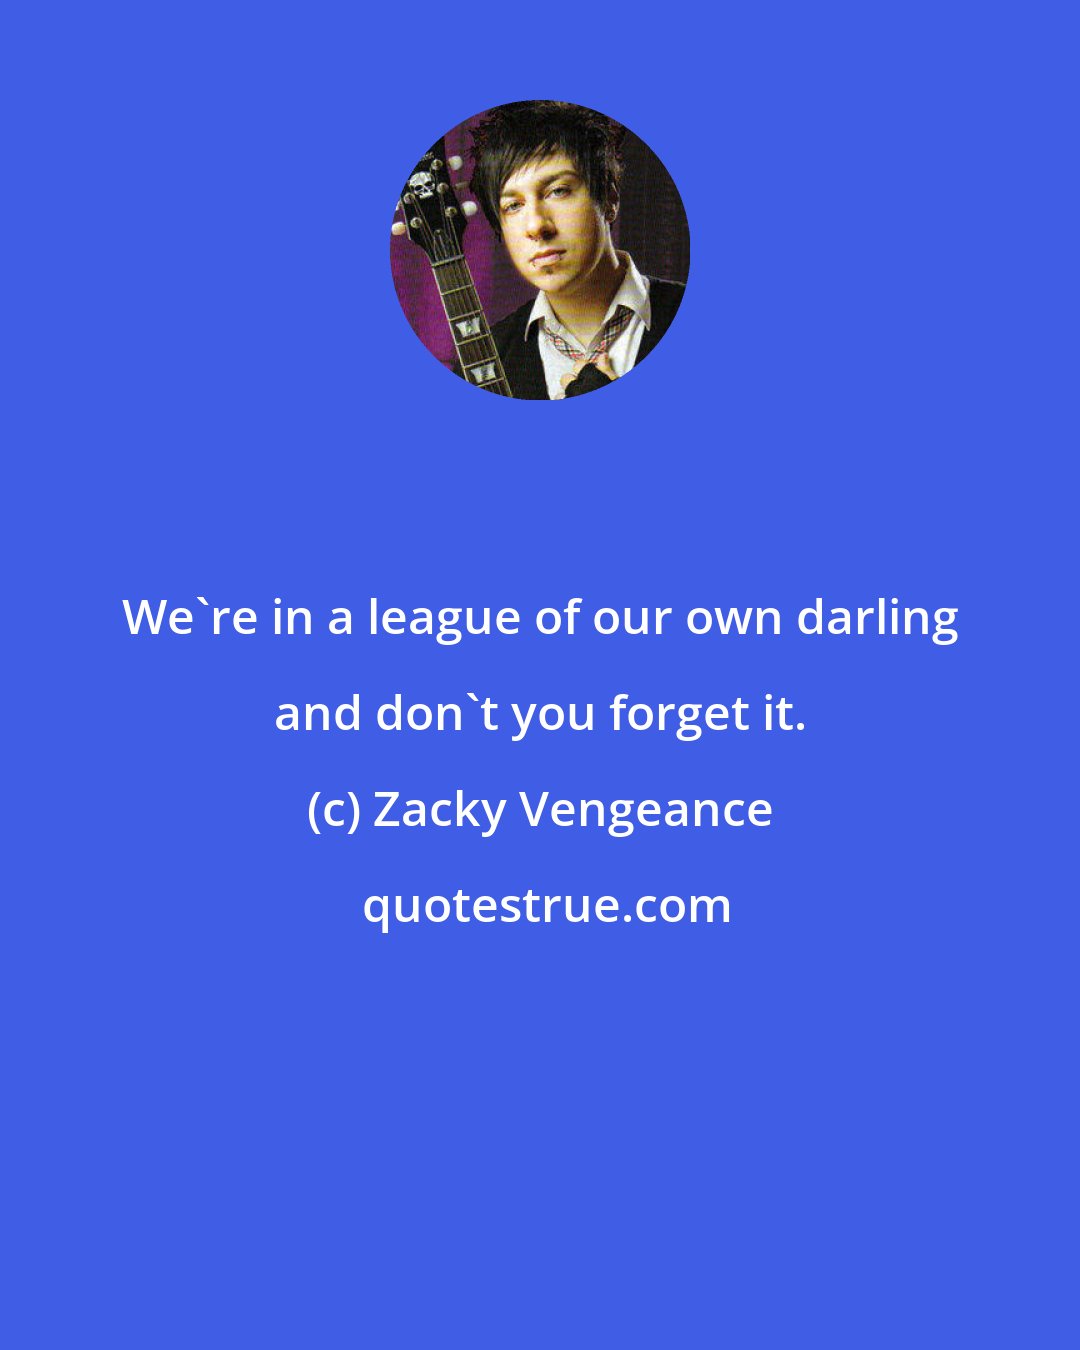 Zacky Vengeance: We're in a league of our own darling and don't you forget it.